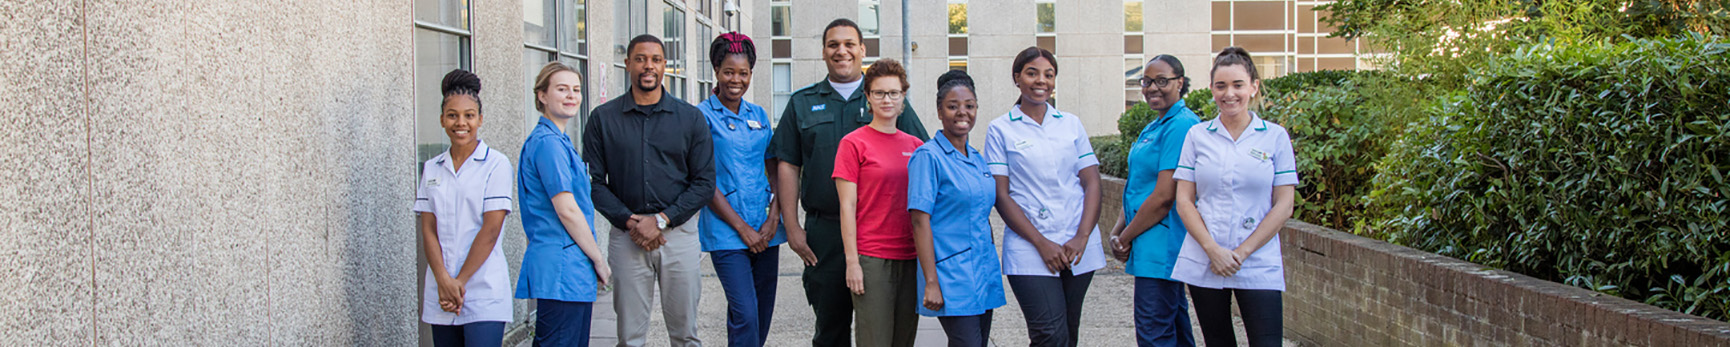 health and social work students in uniform